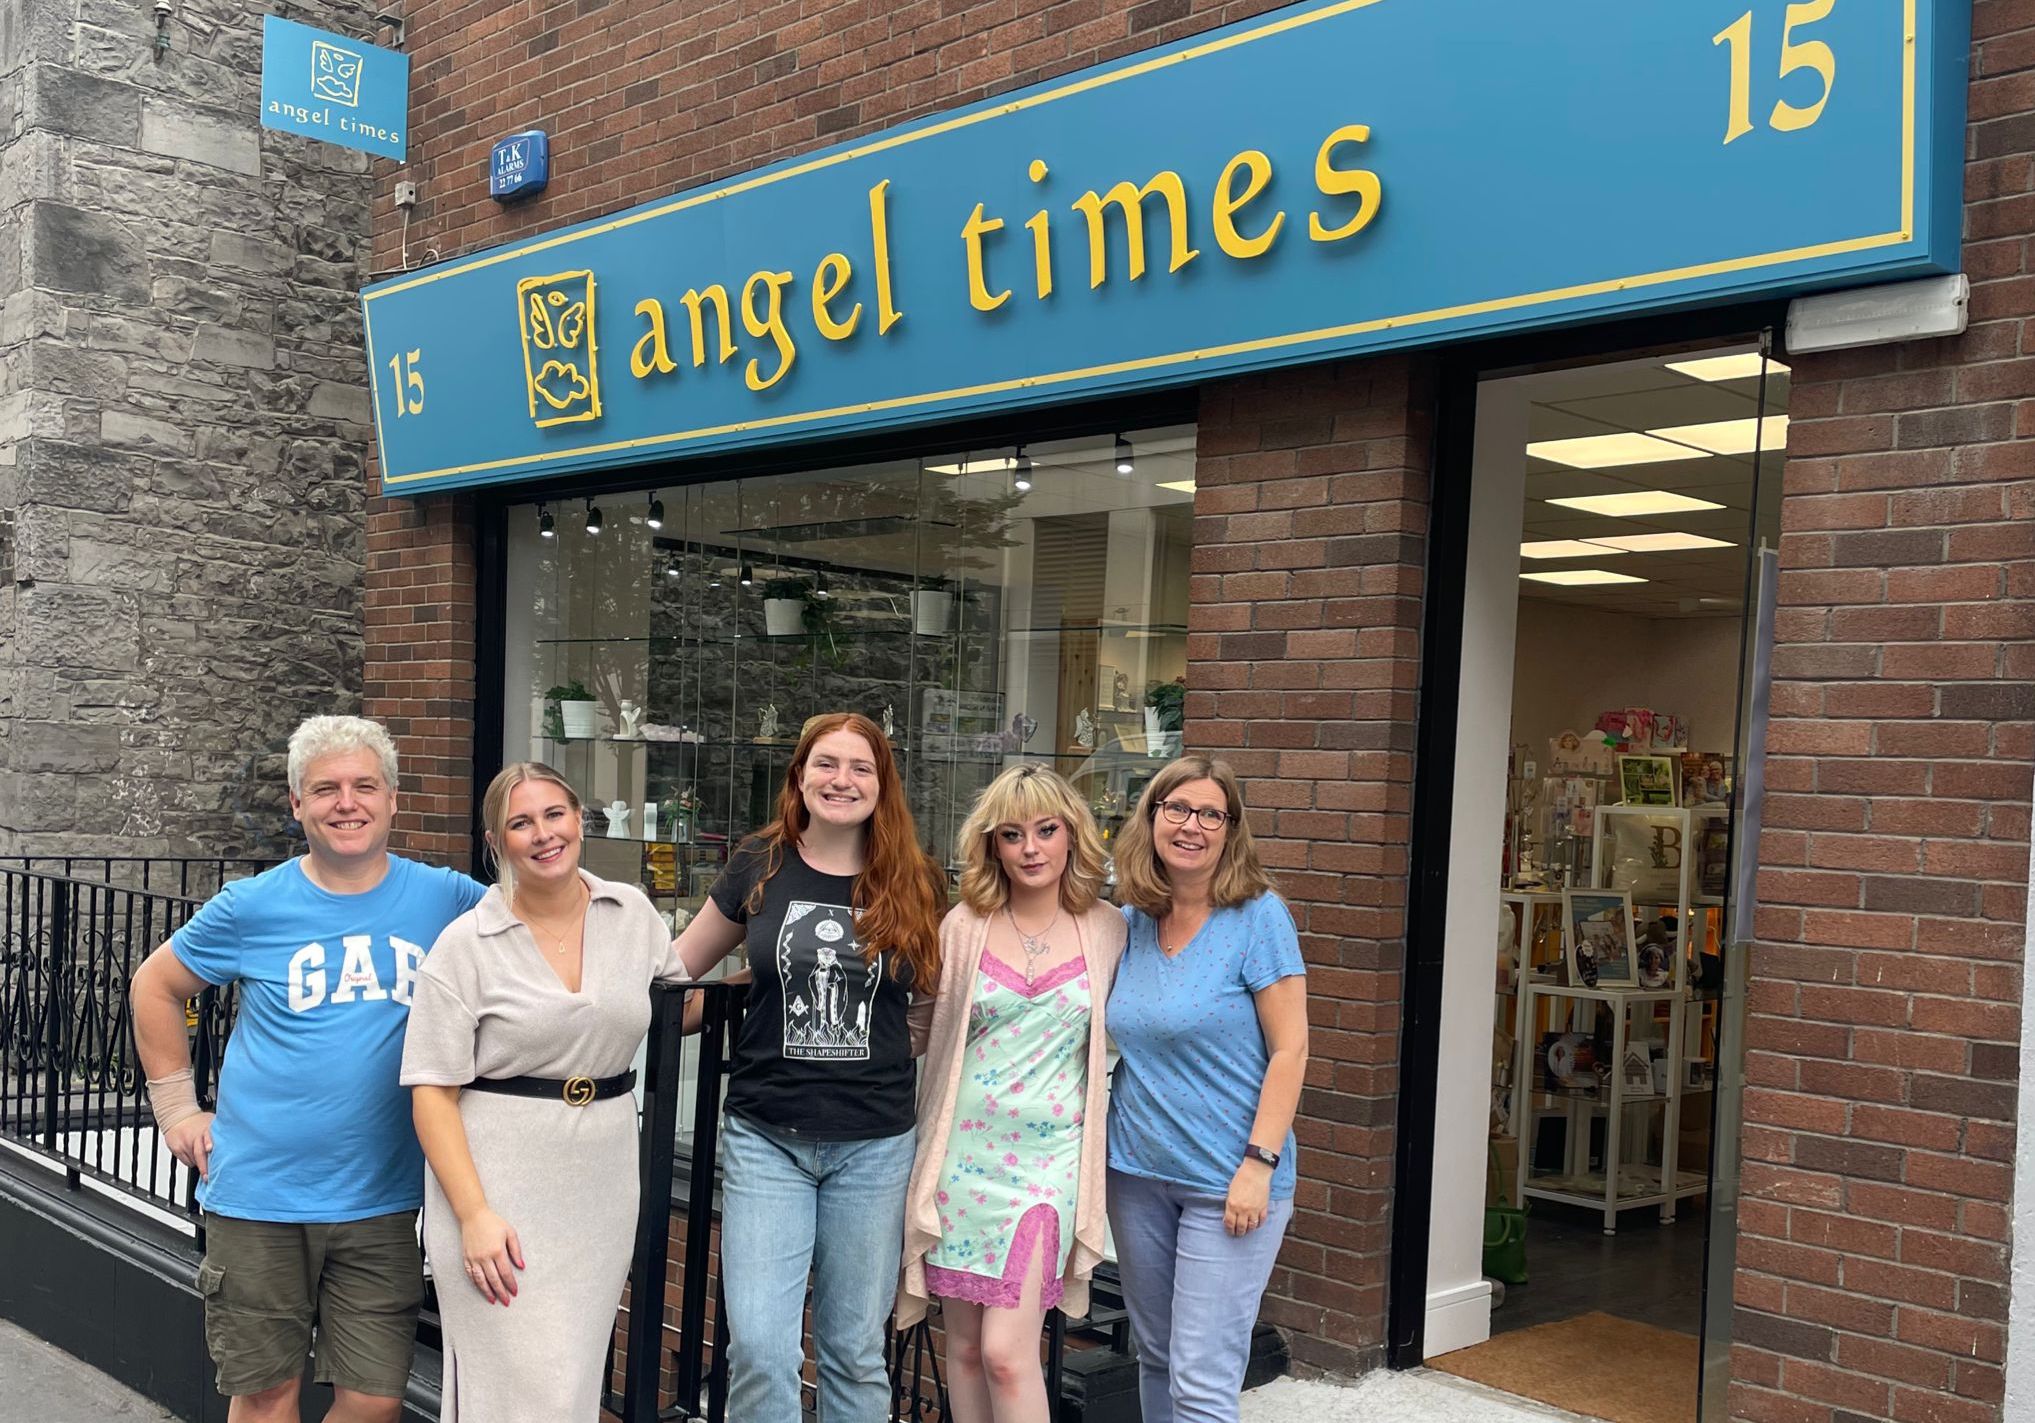 Angel Times owned and operated by husband and wife Stephen Ryan & Janet Kingston are hosting a Relaunch Event on July.